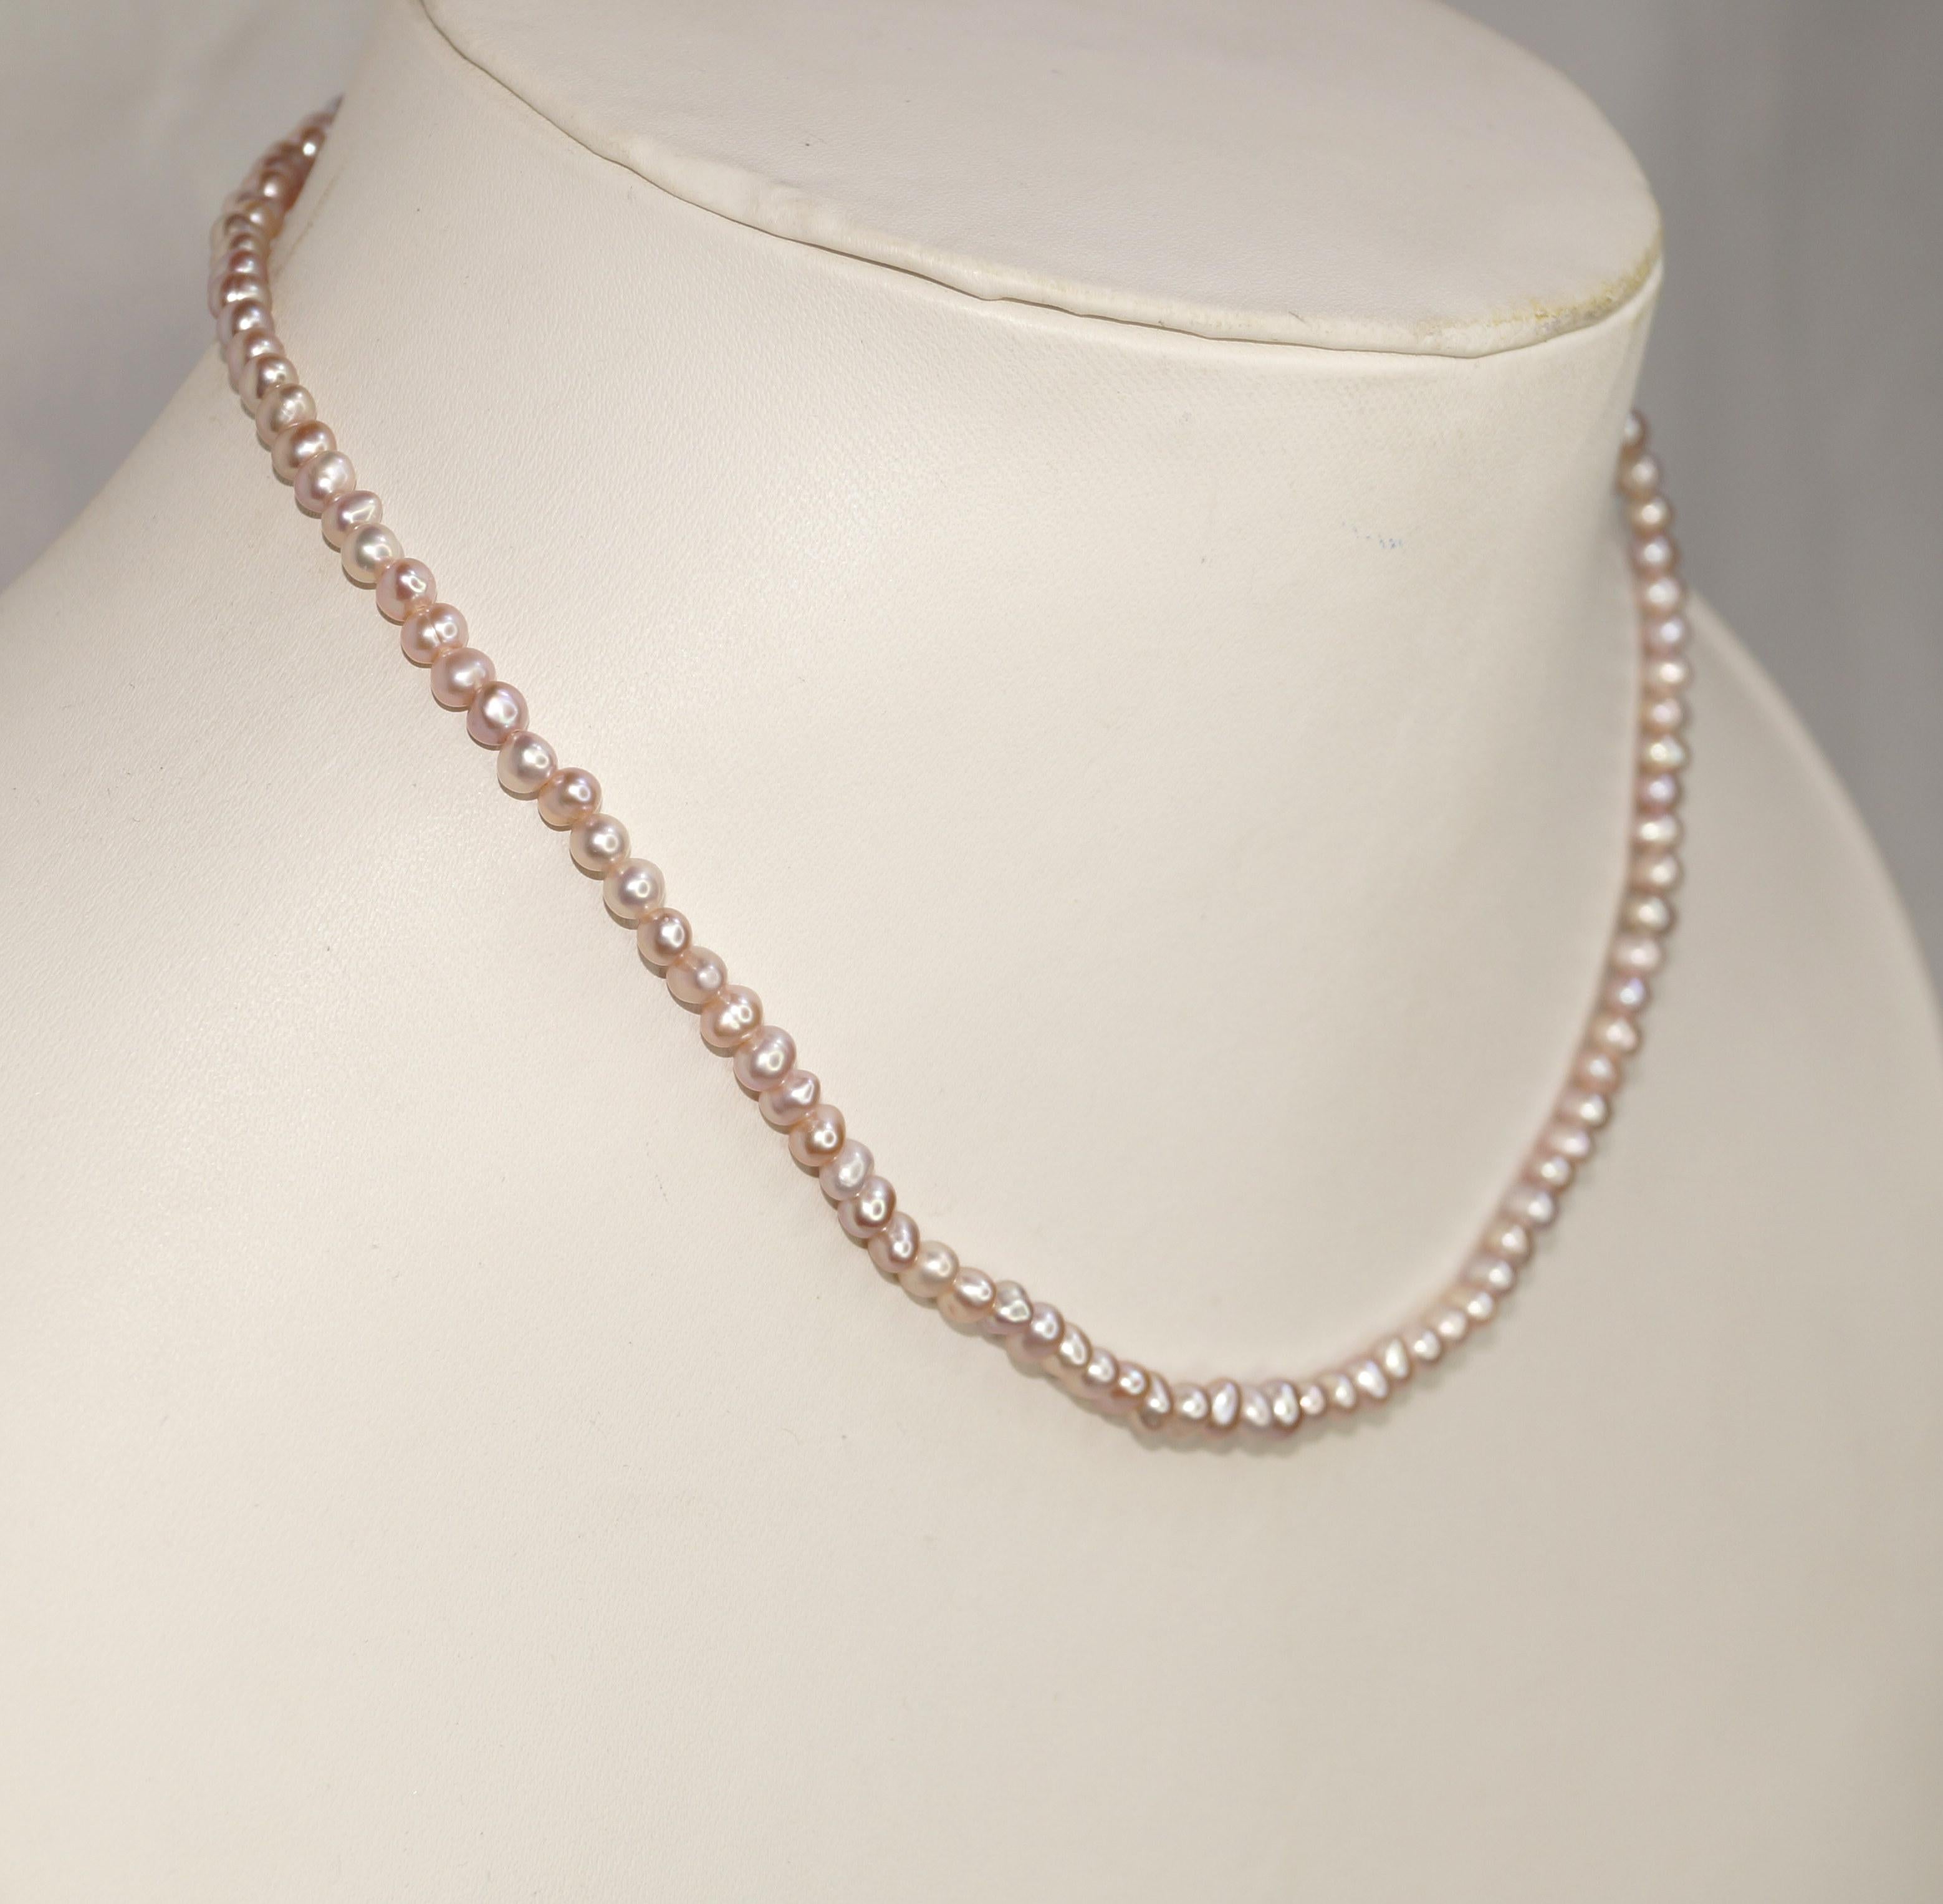 Details:
: 14k Yellow Gold Lock Freshwater pearl beads Necklace.

: Item no- KM11/1001/9864

:Pearl Size: 4-5mm (Approx.)

:Necklace length: 17